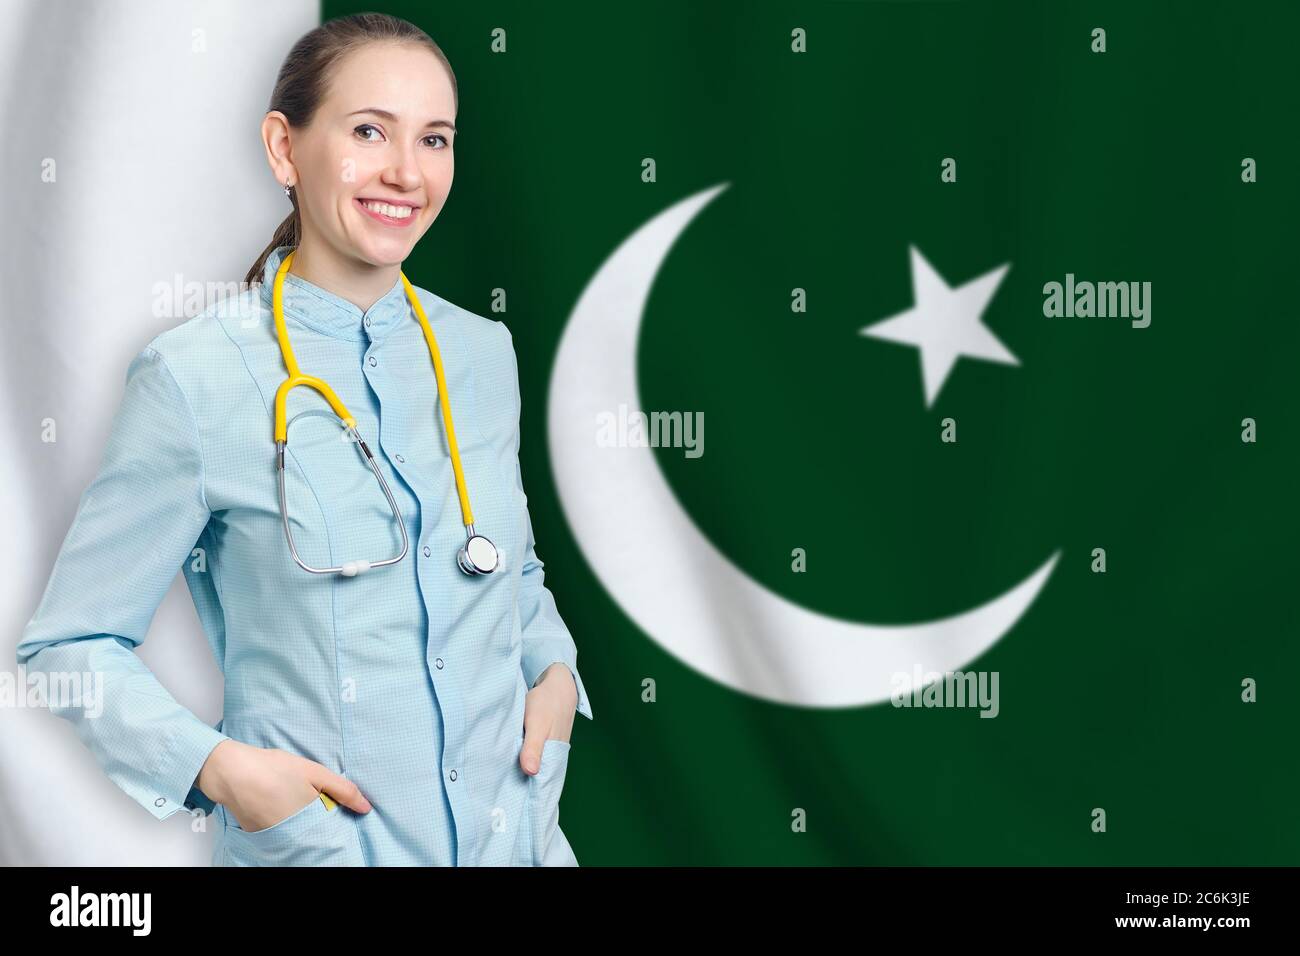 Islamic Republic of Pakistan healthcare concept with doctor on flag background. Medical insurance, work or study in the country Stock Photo